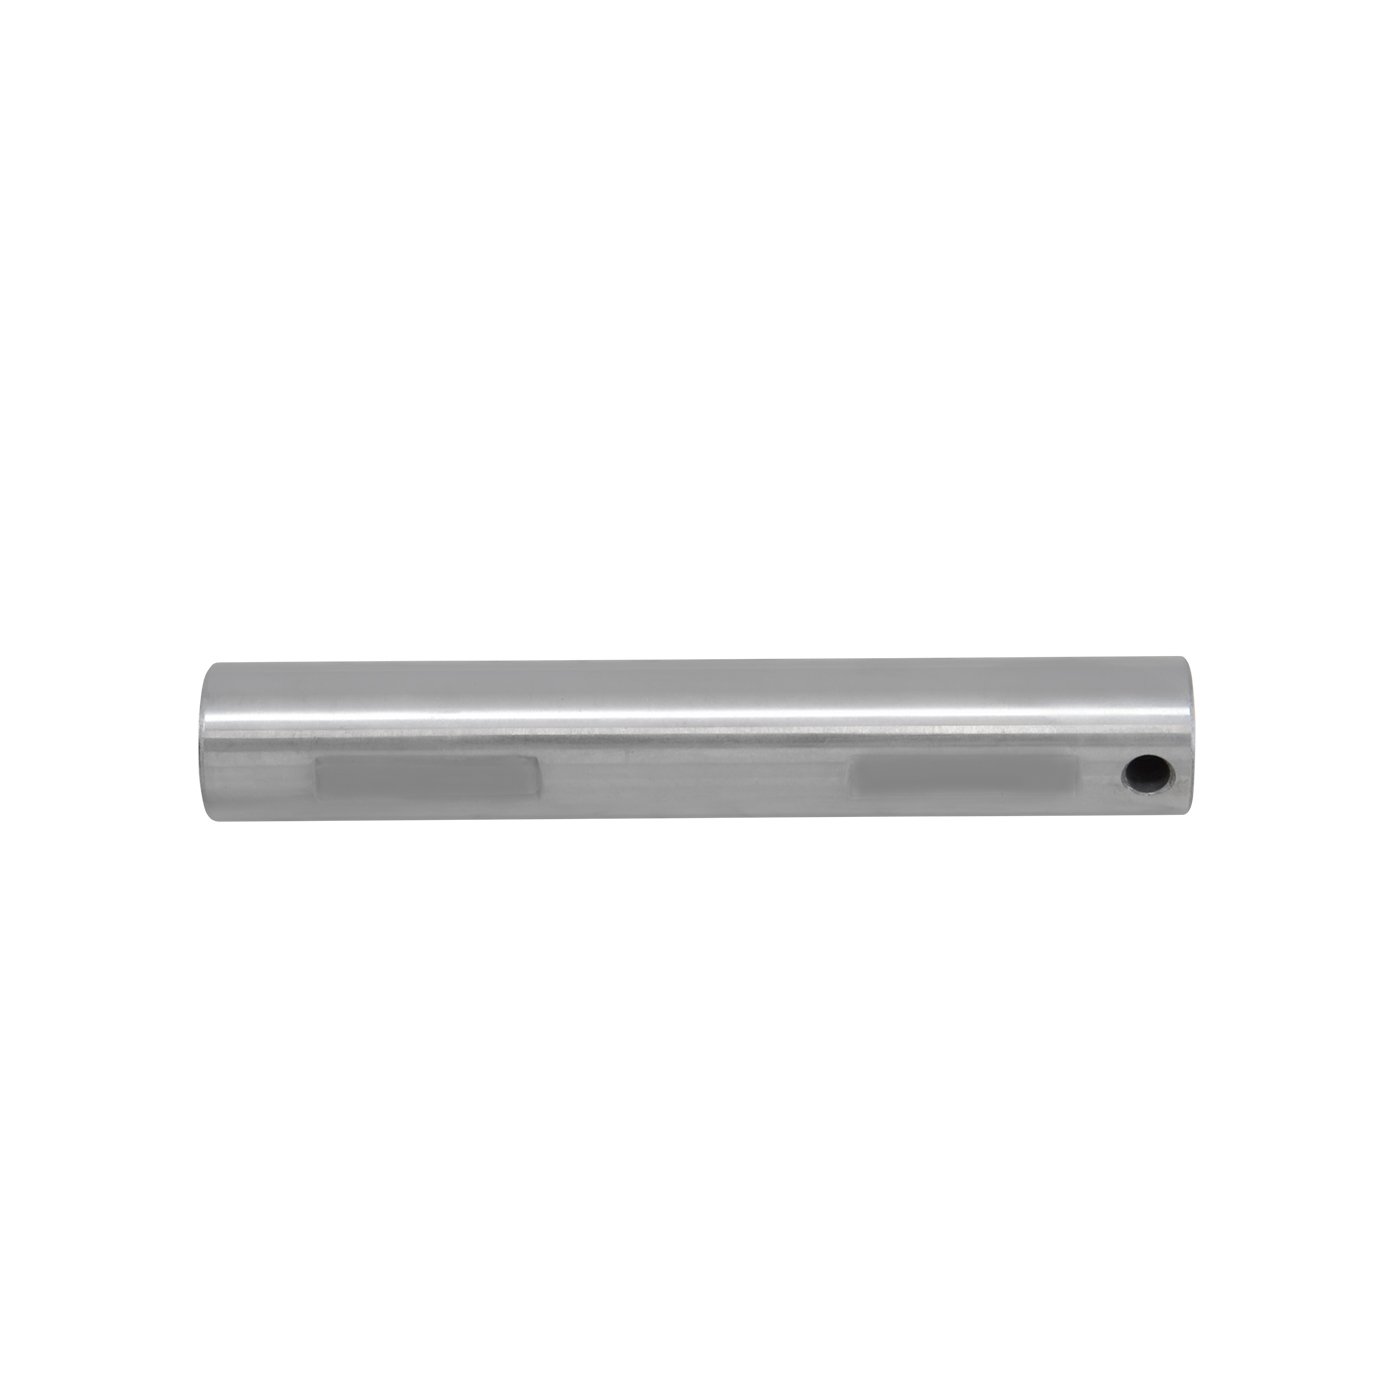 Replacement Cross Pin Shaft For Spicer 50, Standard Open